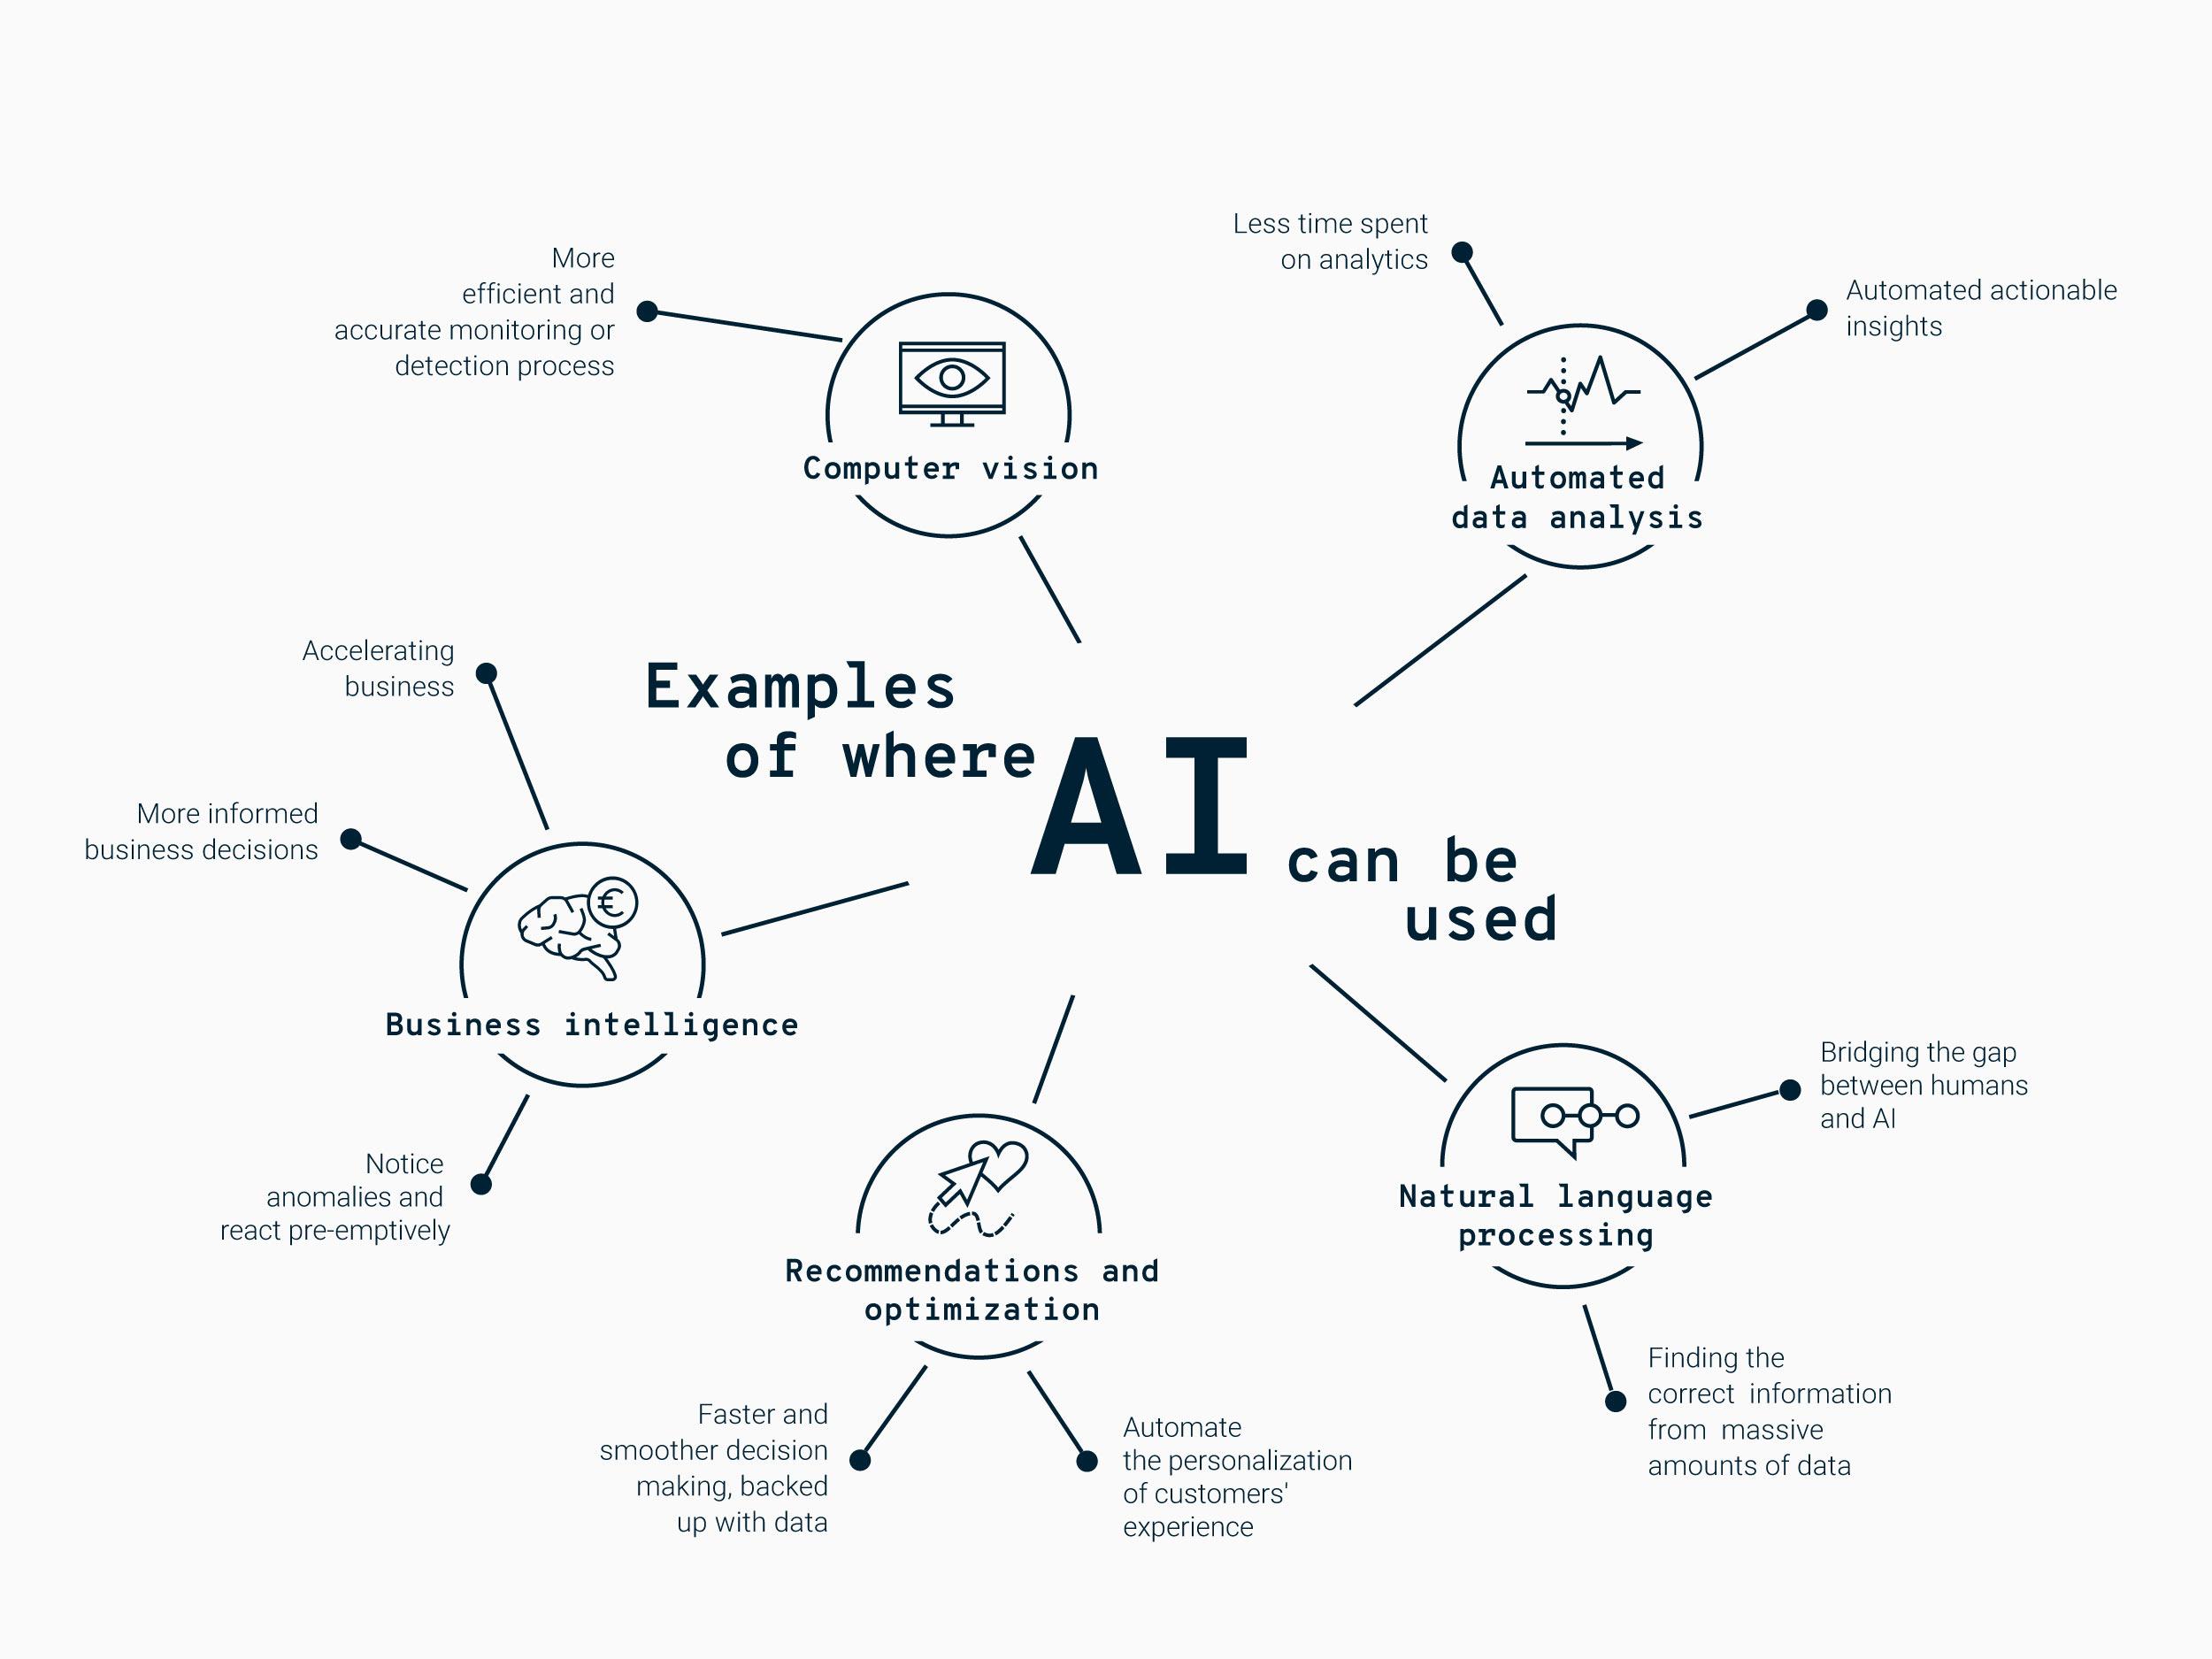 What AI can be used for